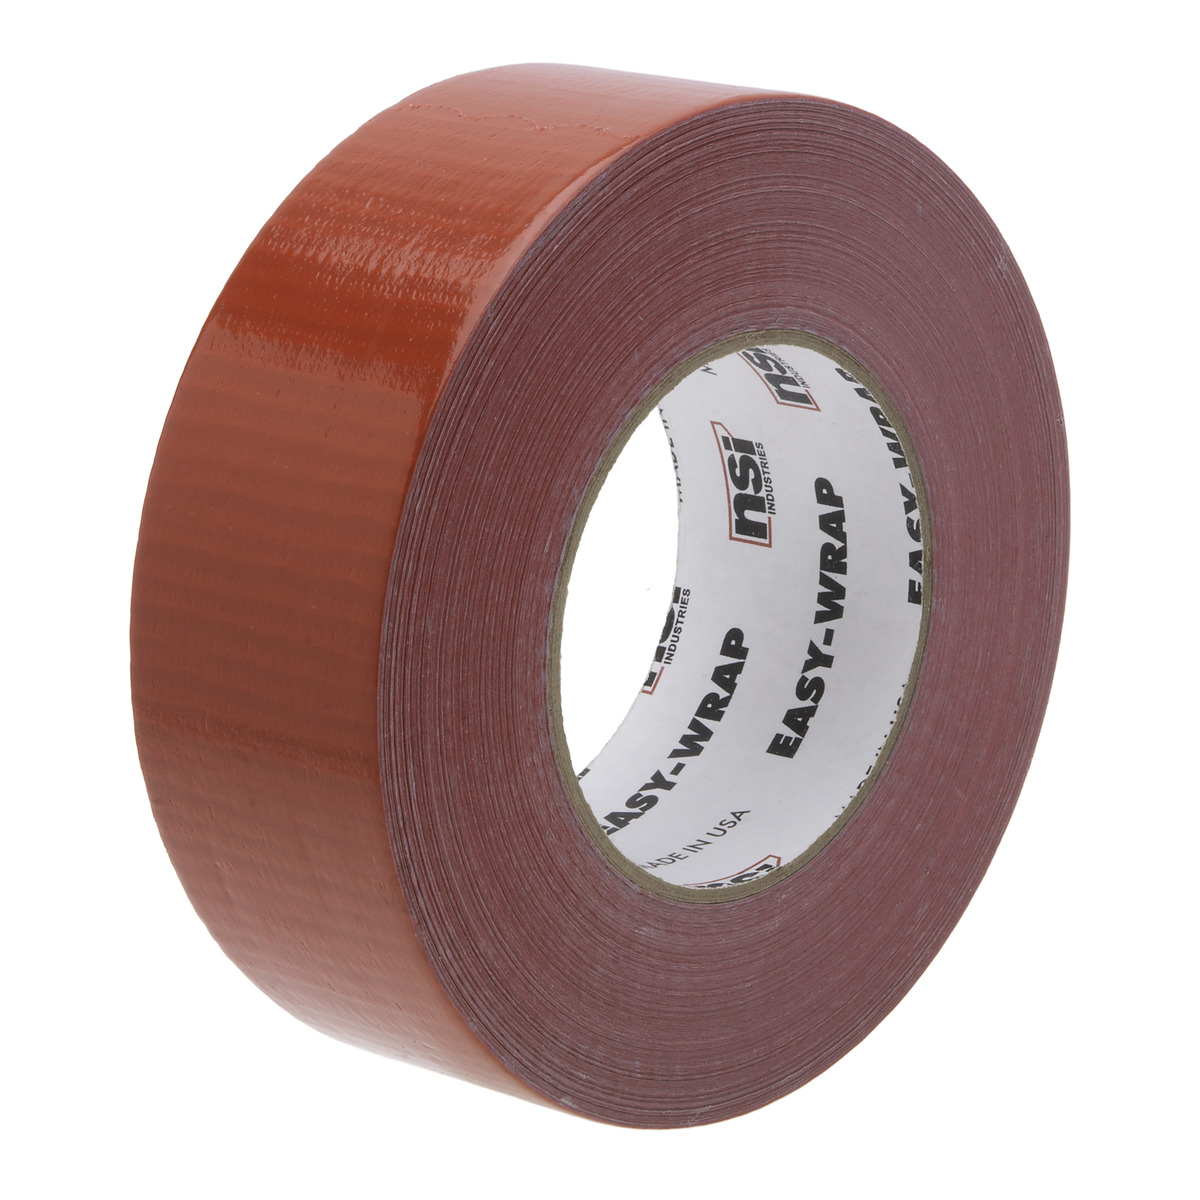 Facts about Phasing and Electrical Tape Colors - NSI Industries